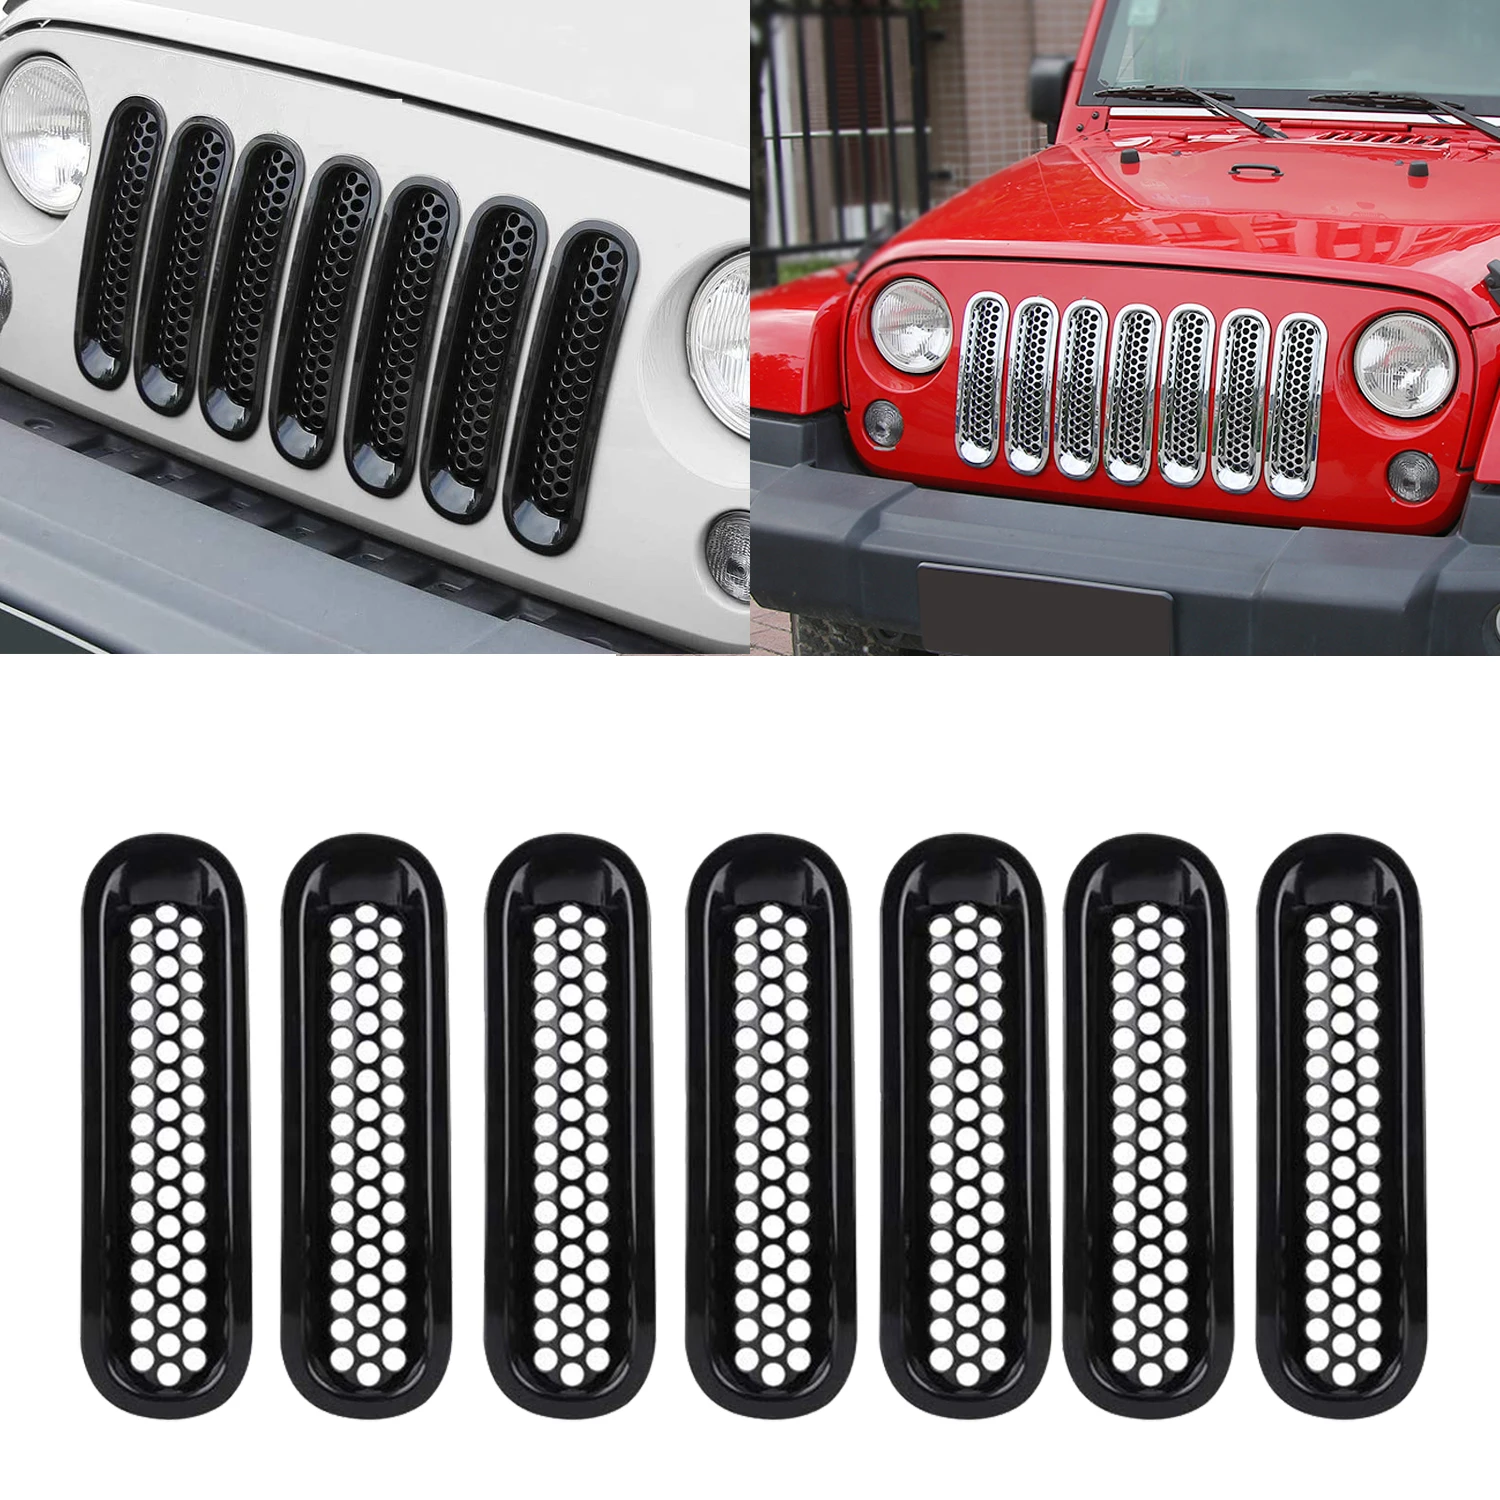 

7pcs Front Grill Mesh Auto Car Chrome Grille Insert Honeycomb Cover ABS Accessories for Jeep Wrangler JK 2007-2017